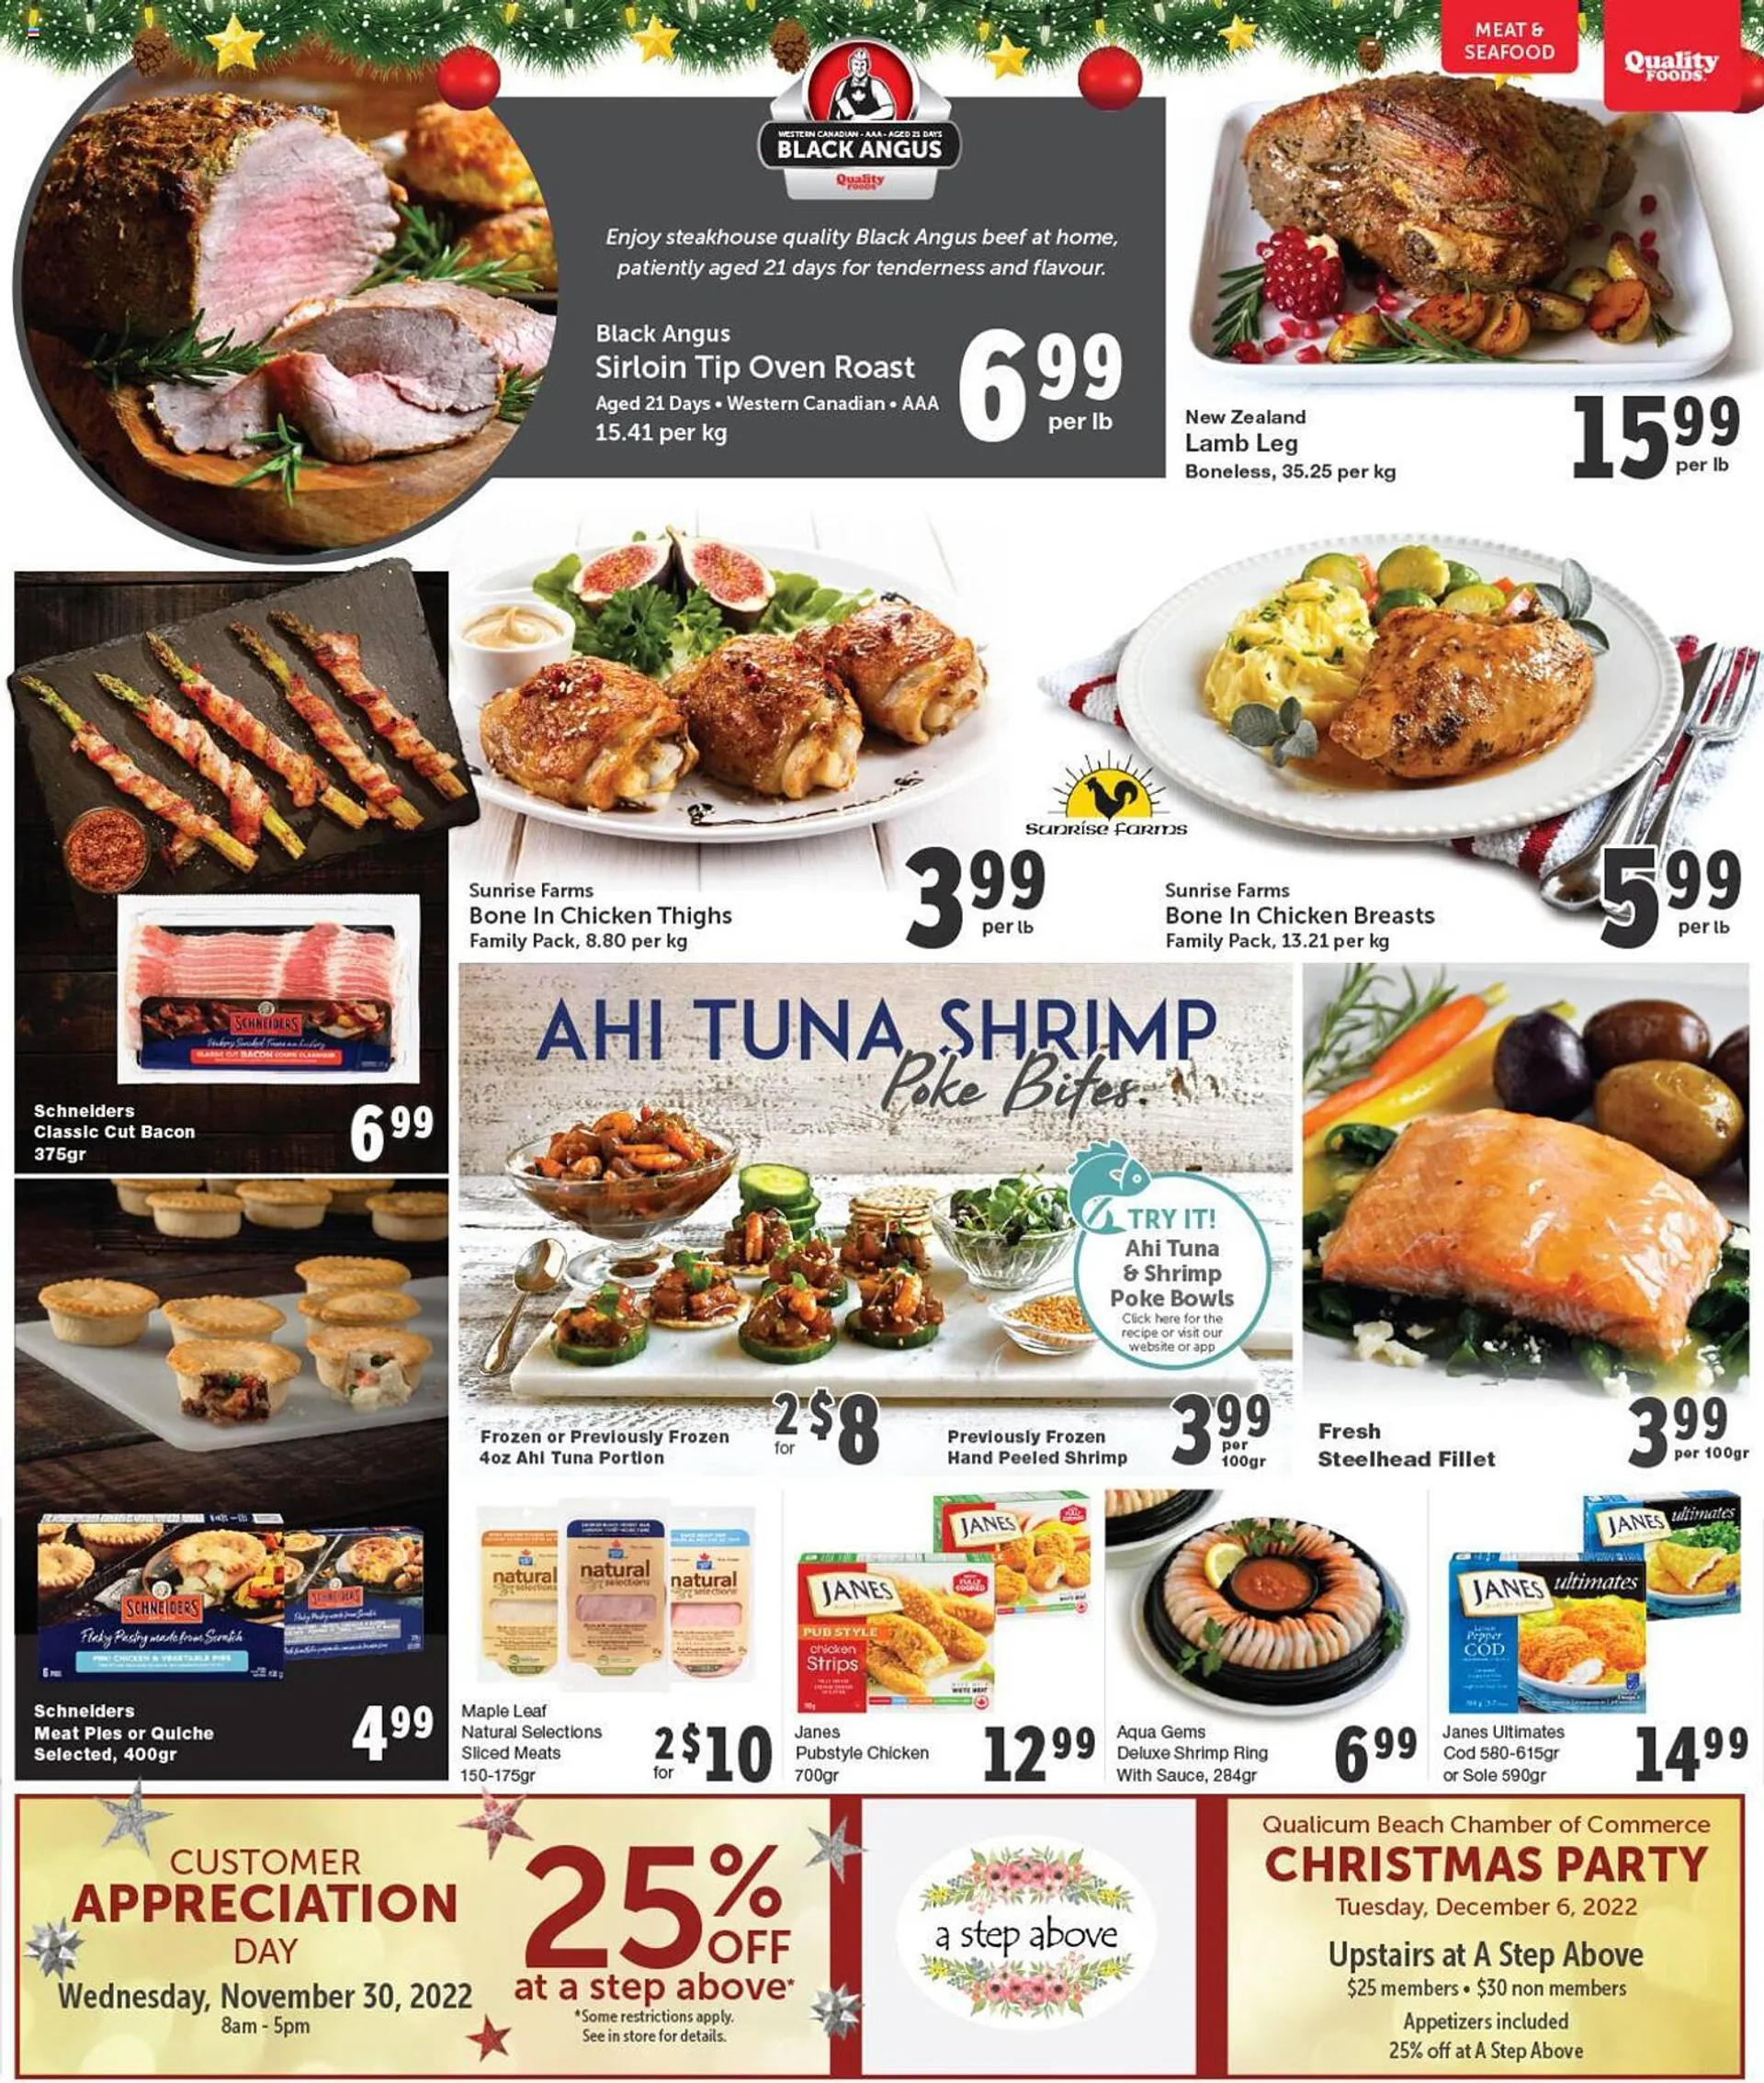 Quality Foods flyer - 3